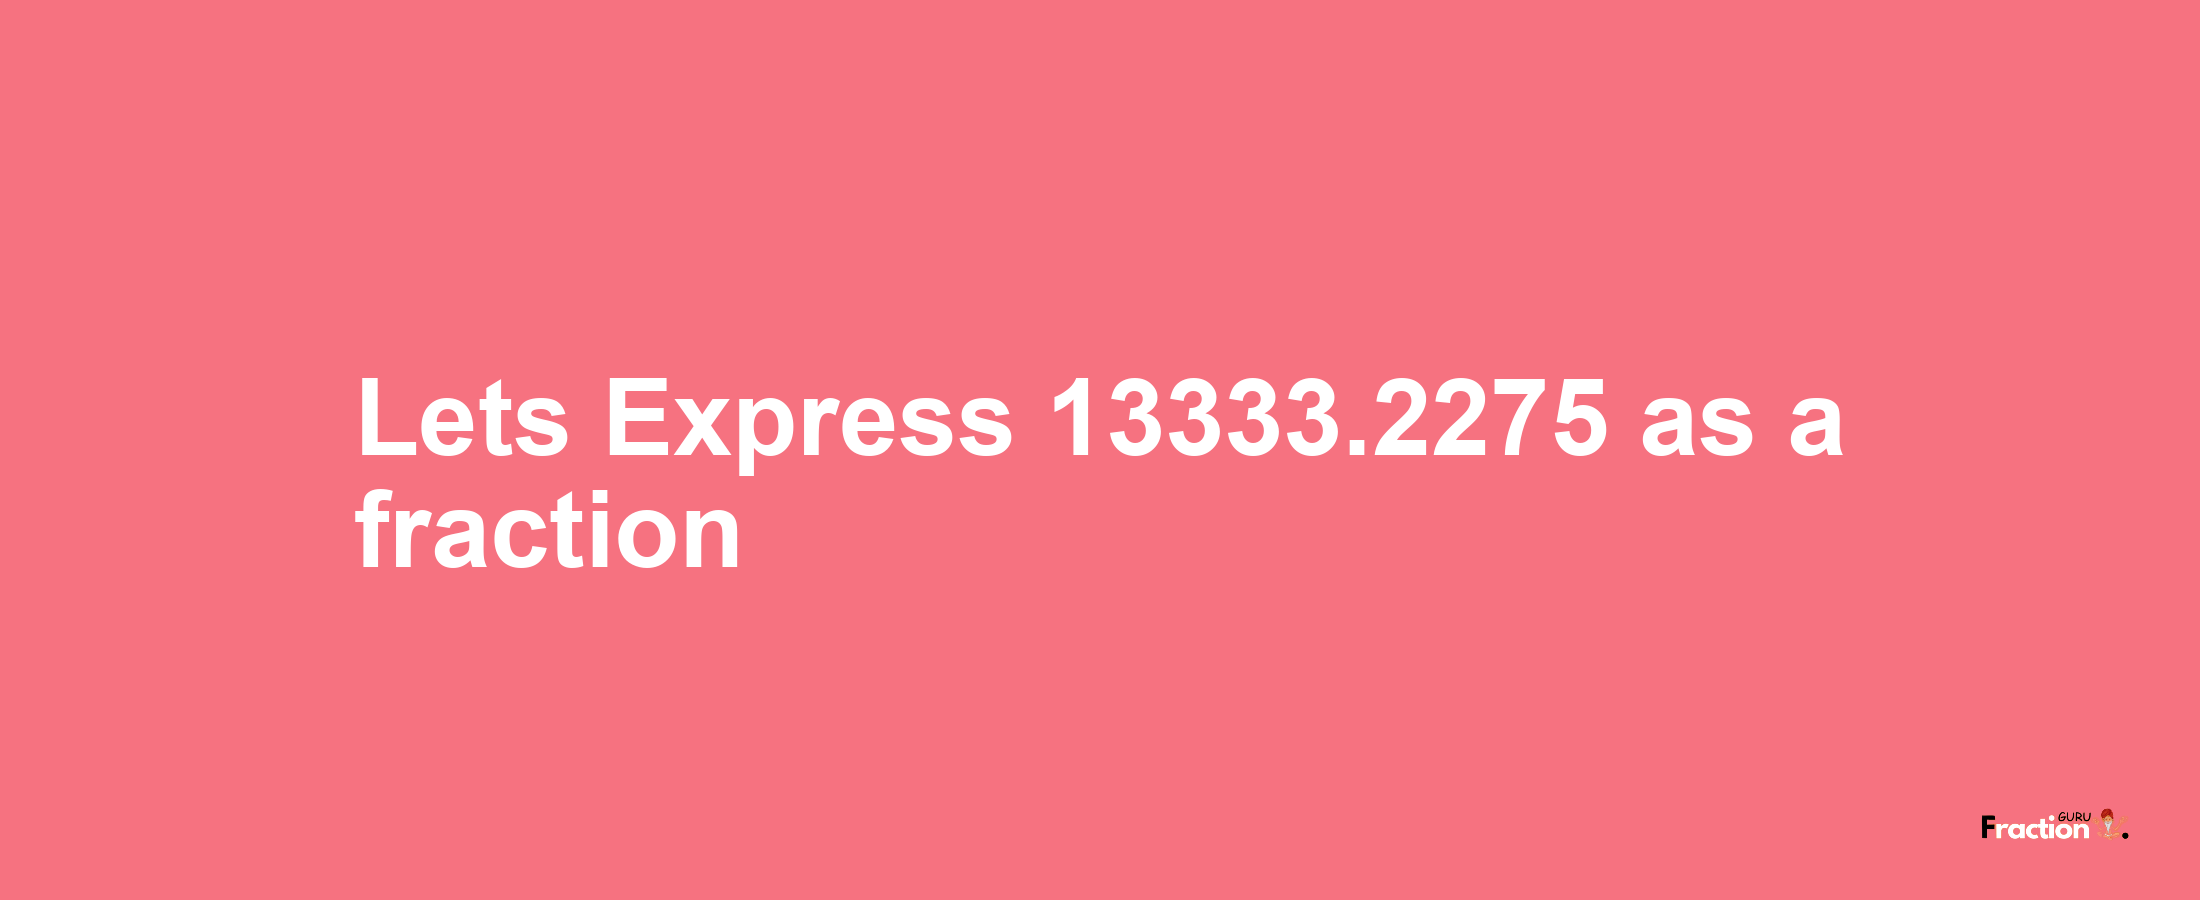 Lets Express 13333.2275 as afraction